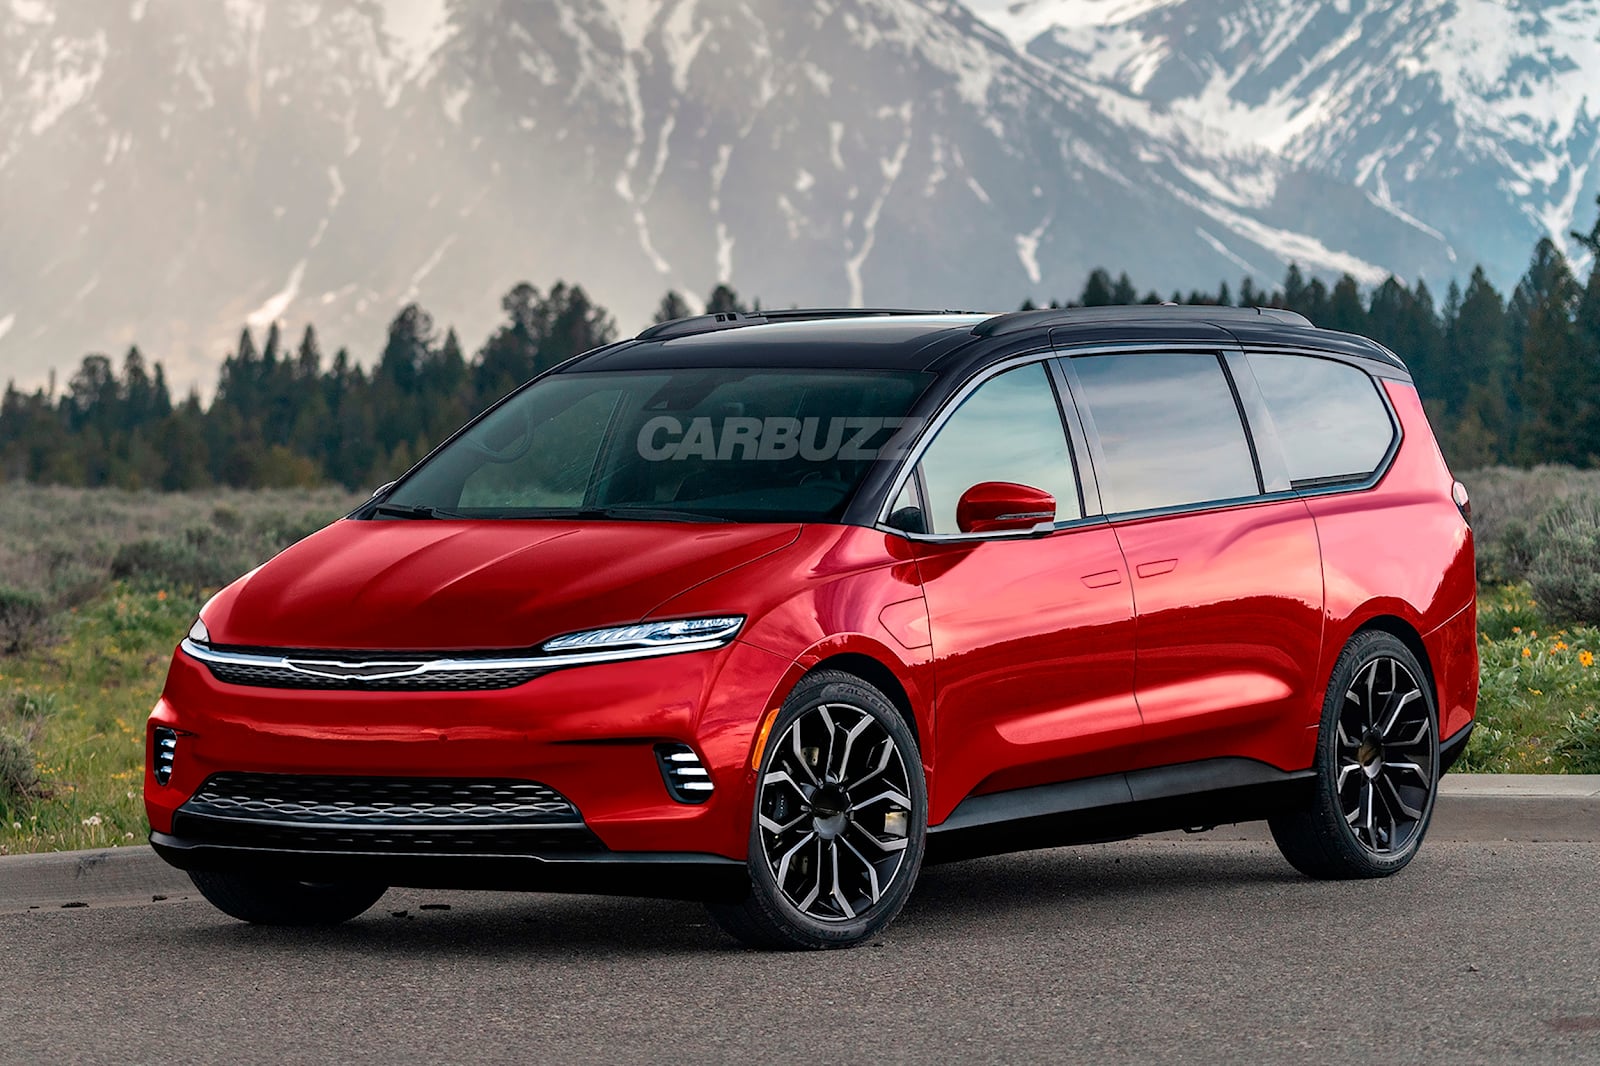 soccer-moms-will-love-the-electric-chrysler-pacifica-minivan-carbuzz